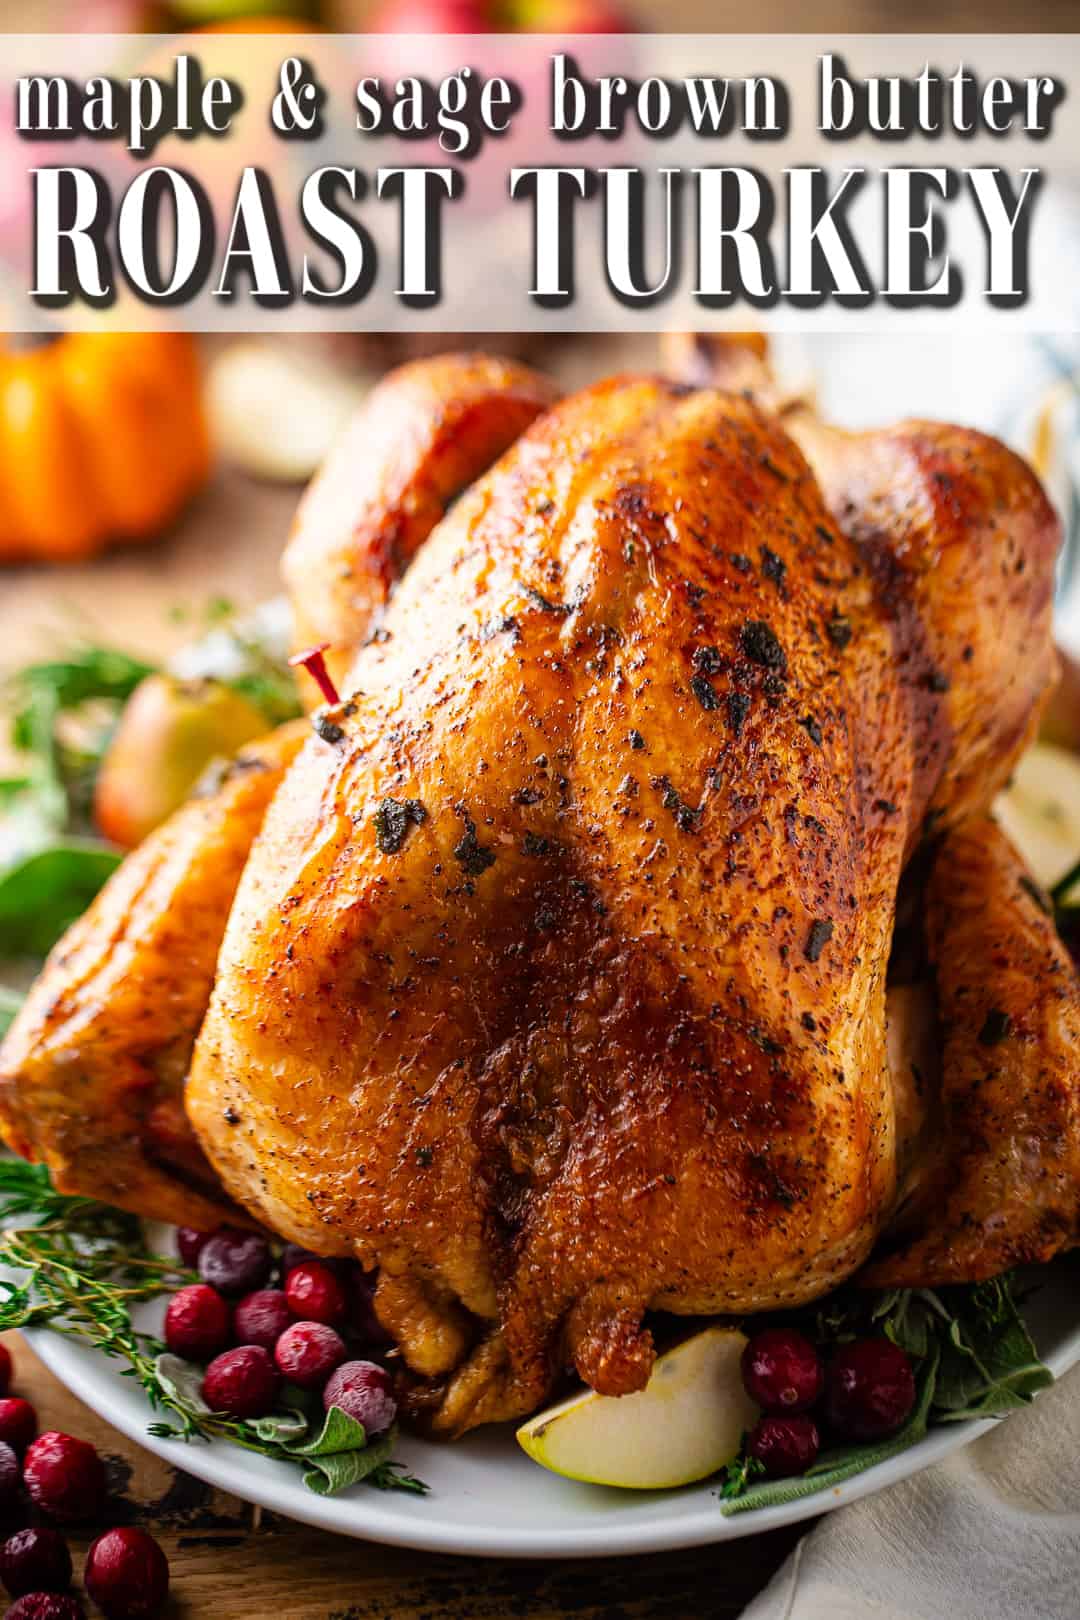 Best turkey recipe prepared and presented on a platter with herbs and seasonal fruits.